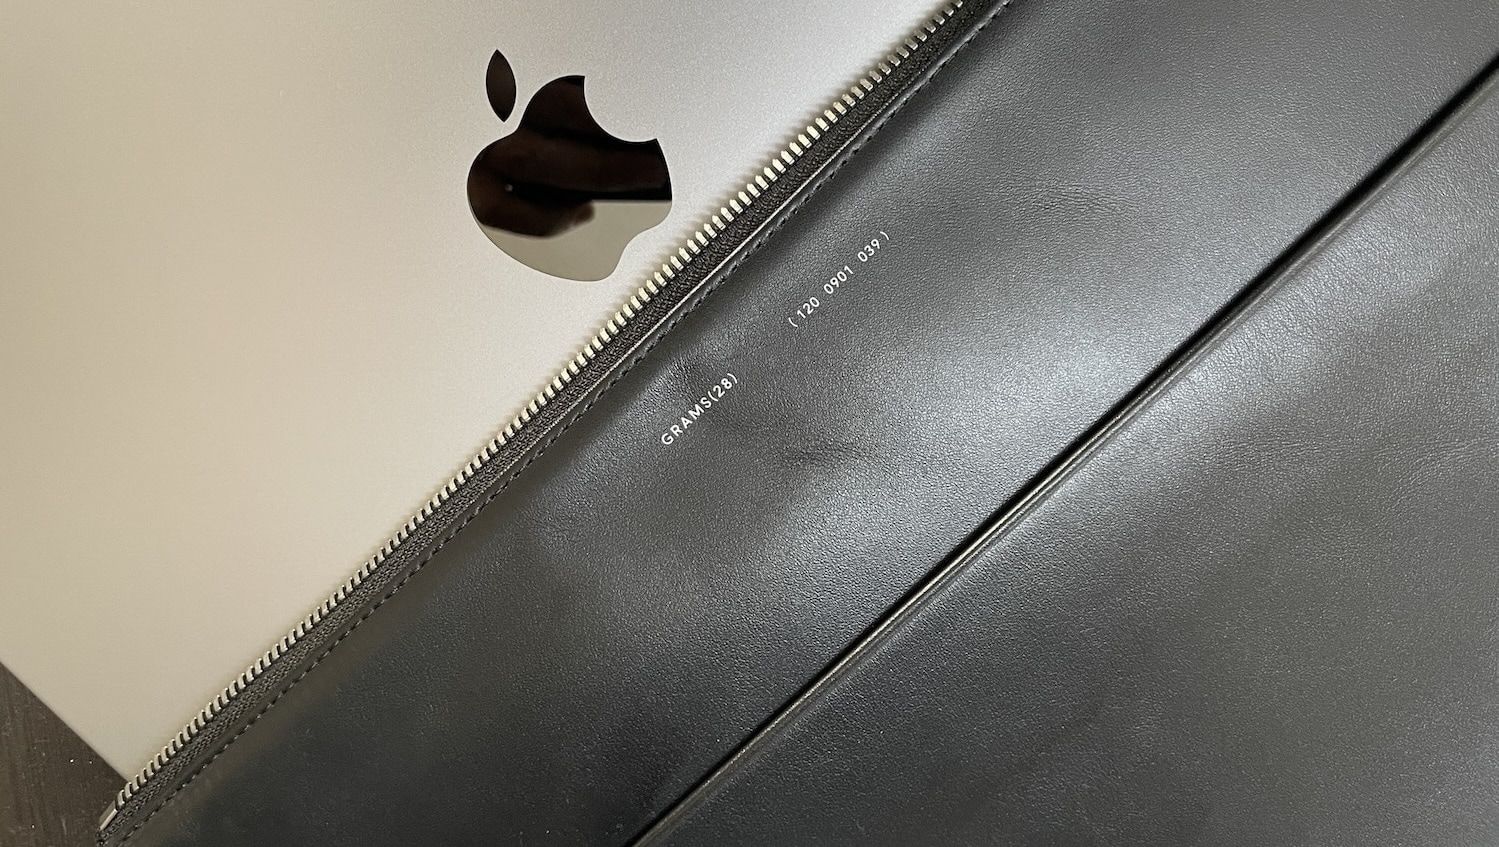 Grams28 120 leather folio with MacBook